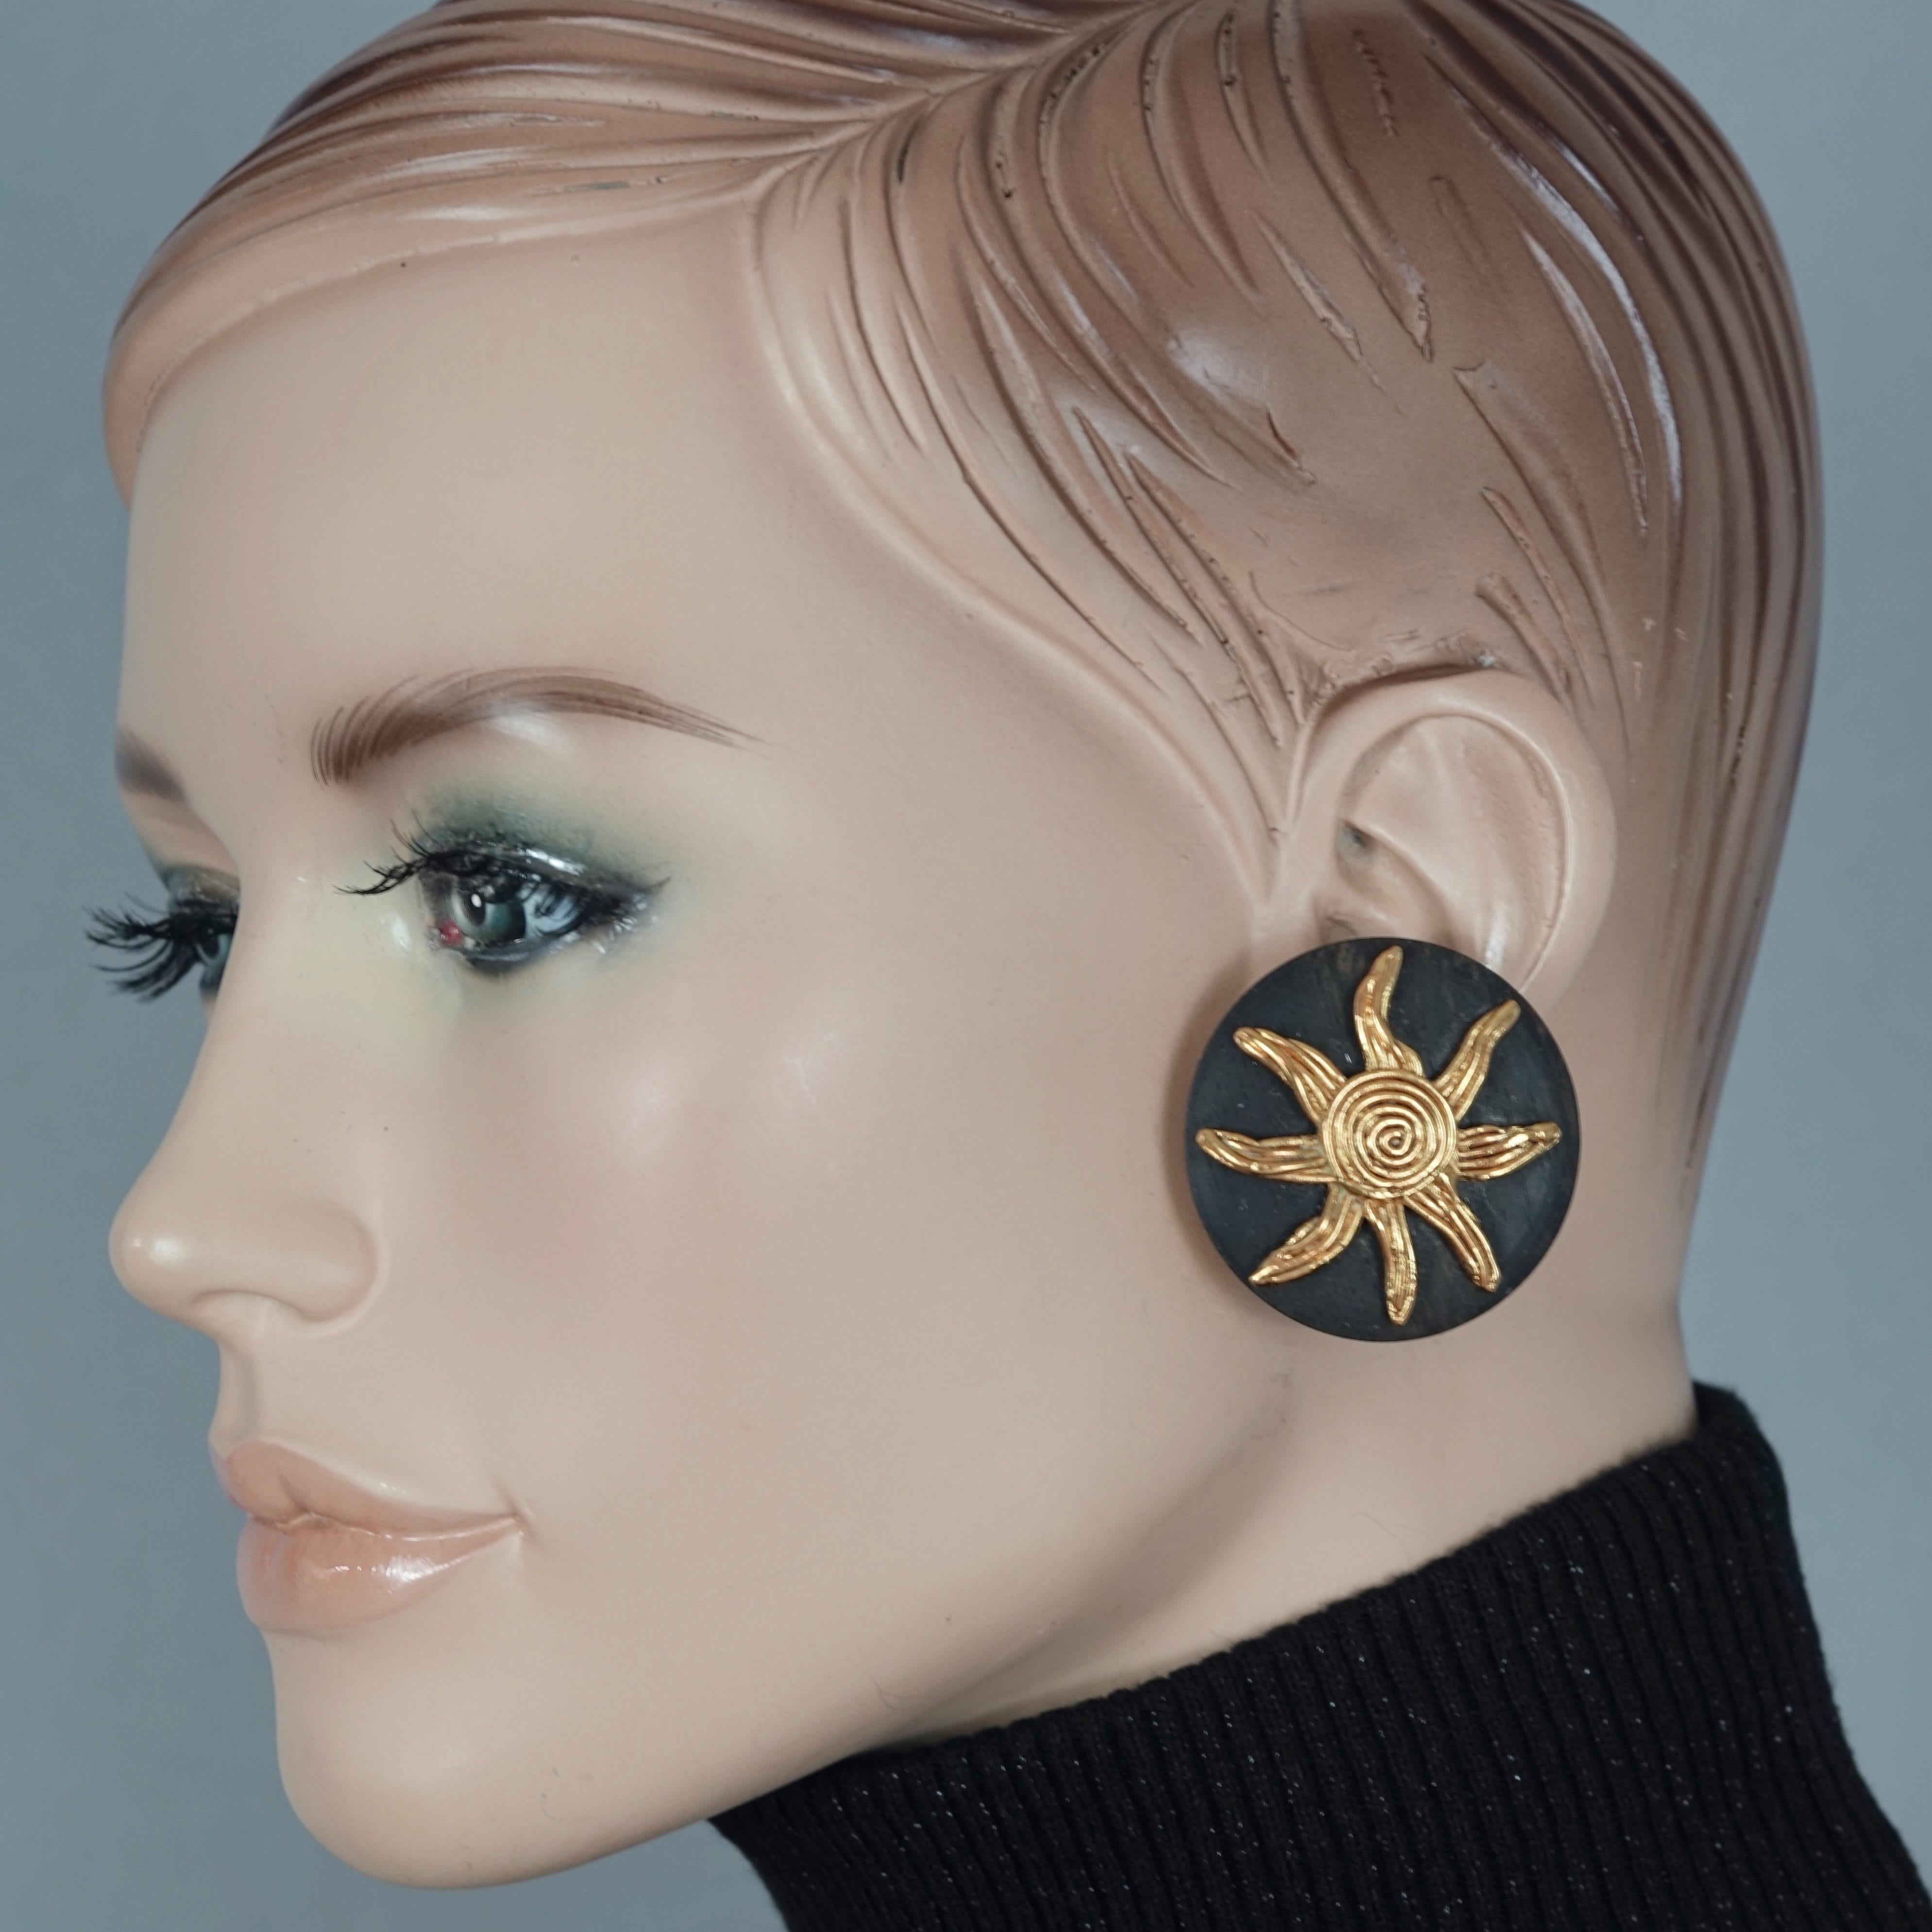 Vintage Massive YVES SAINT LAURENT Ysl Spiral Sun Disc Wood Earrings

Measurements:
Height: 1.61 inches (4.1 cm)
Width: 1.61 inches (4.1 cm)
Weight: 23 grams

Features:
- 100% Authentic YVES SAINT LAURENT.
- Textured sun in spiral pattern overlay on